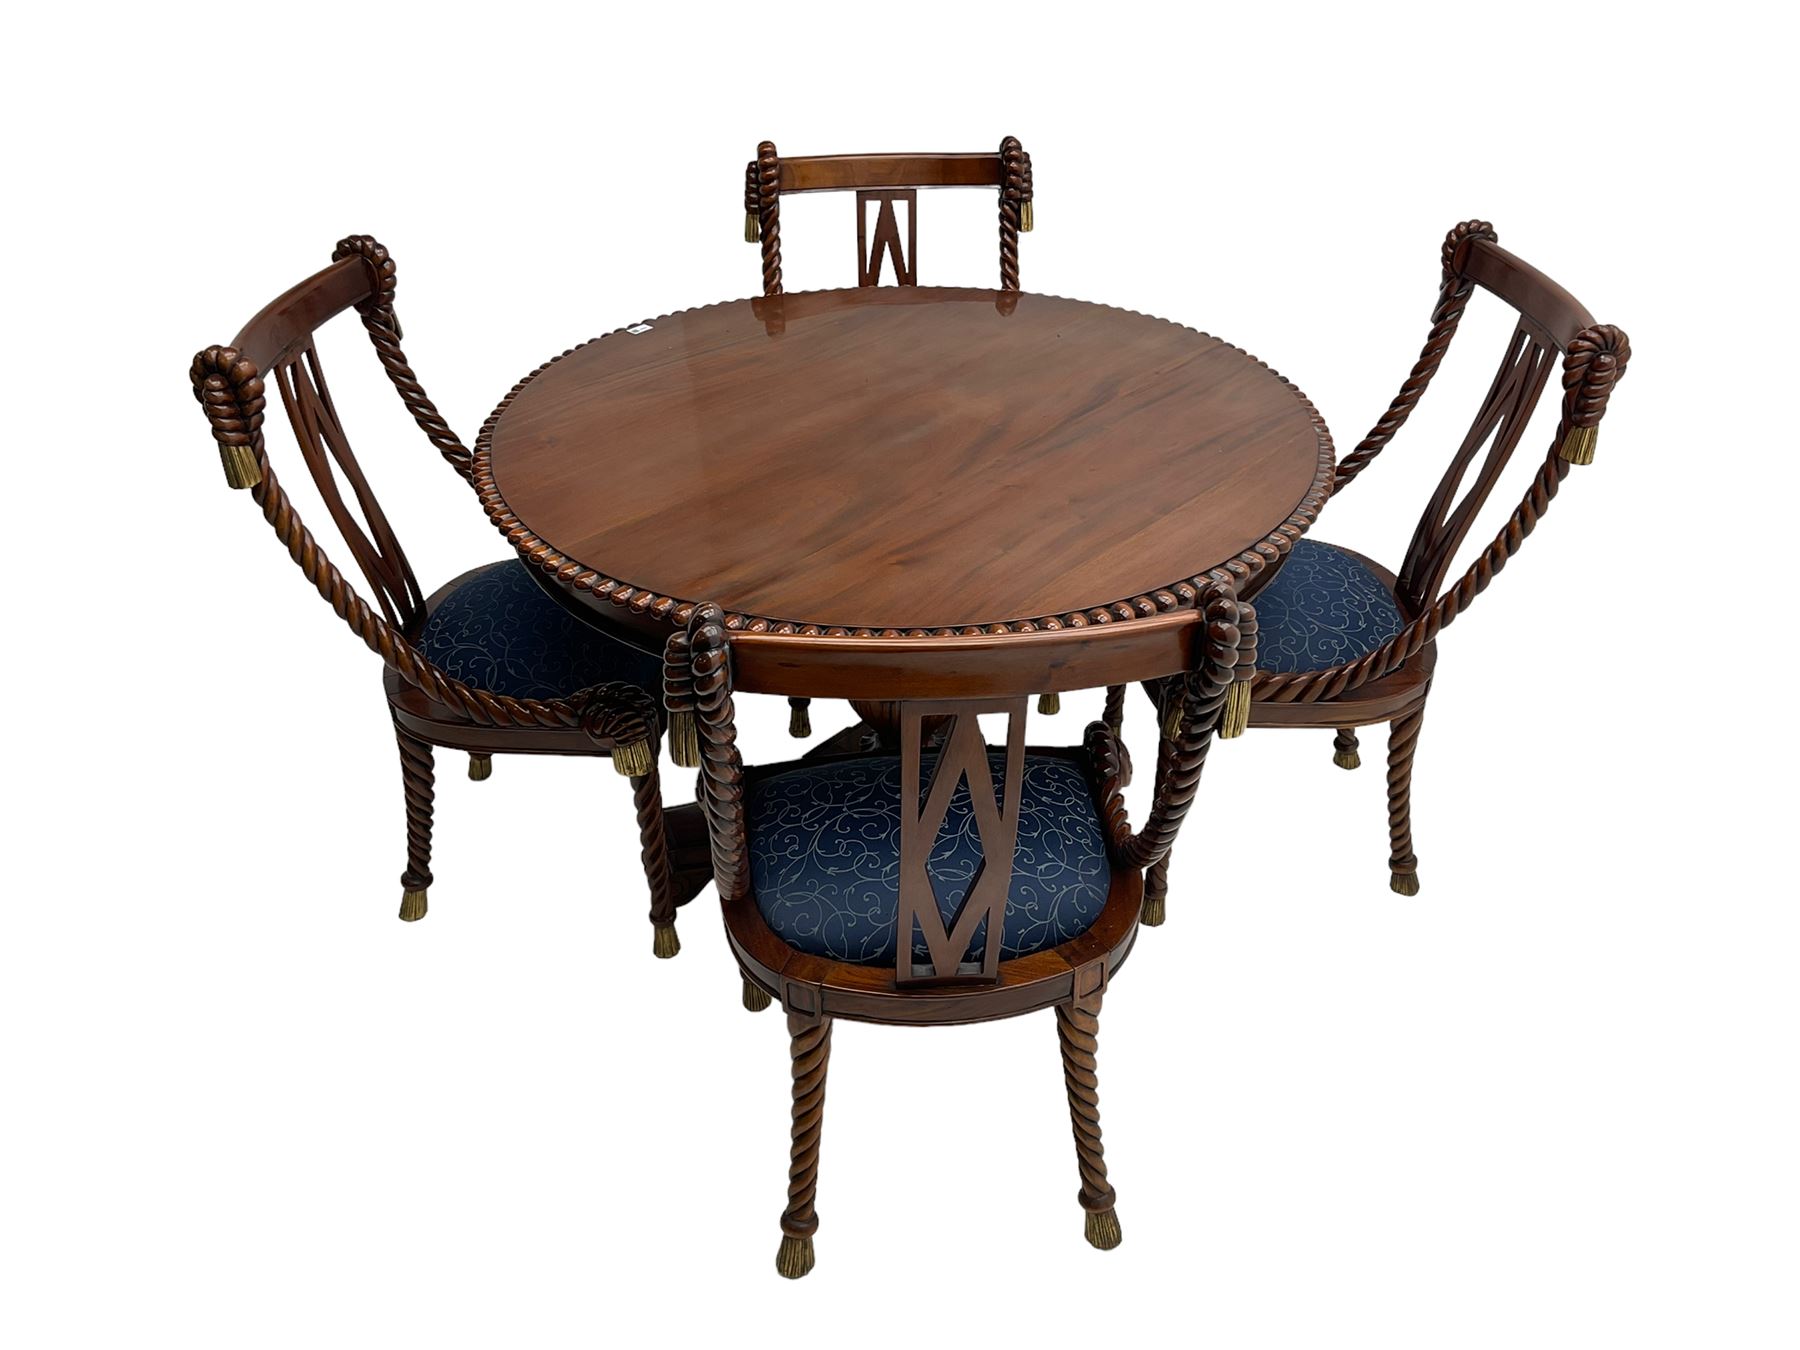 Regency style dining set - the table with circular tilt-top on turned and carved column - Image 5 of 6